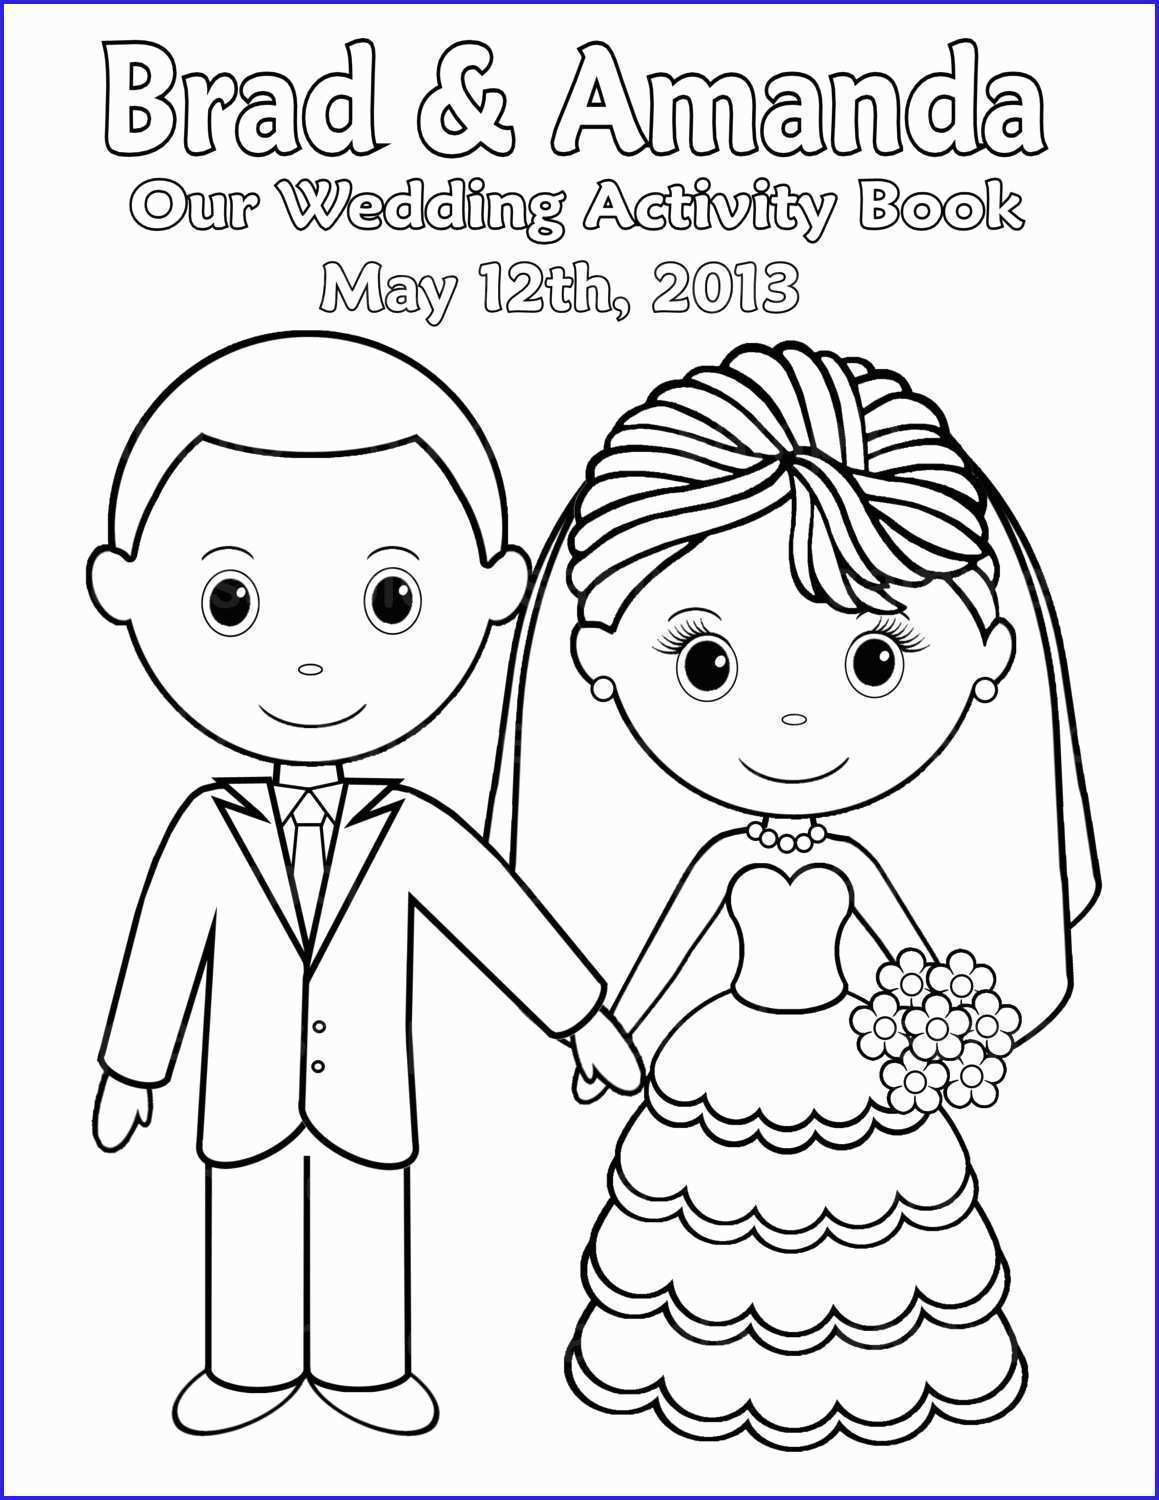 Coloring Pages : Custom Coloring Books From Photos Luxury Free - Free Printable Personalized Wedding Coloring Book